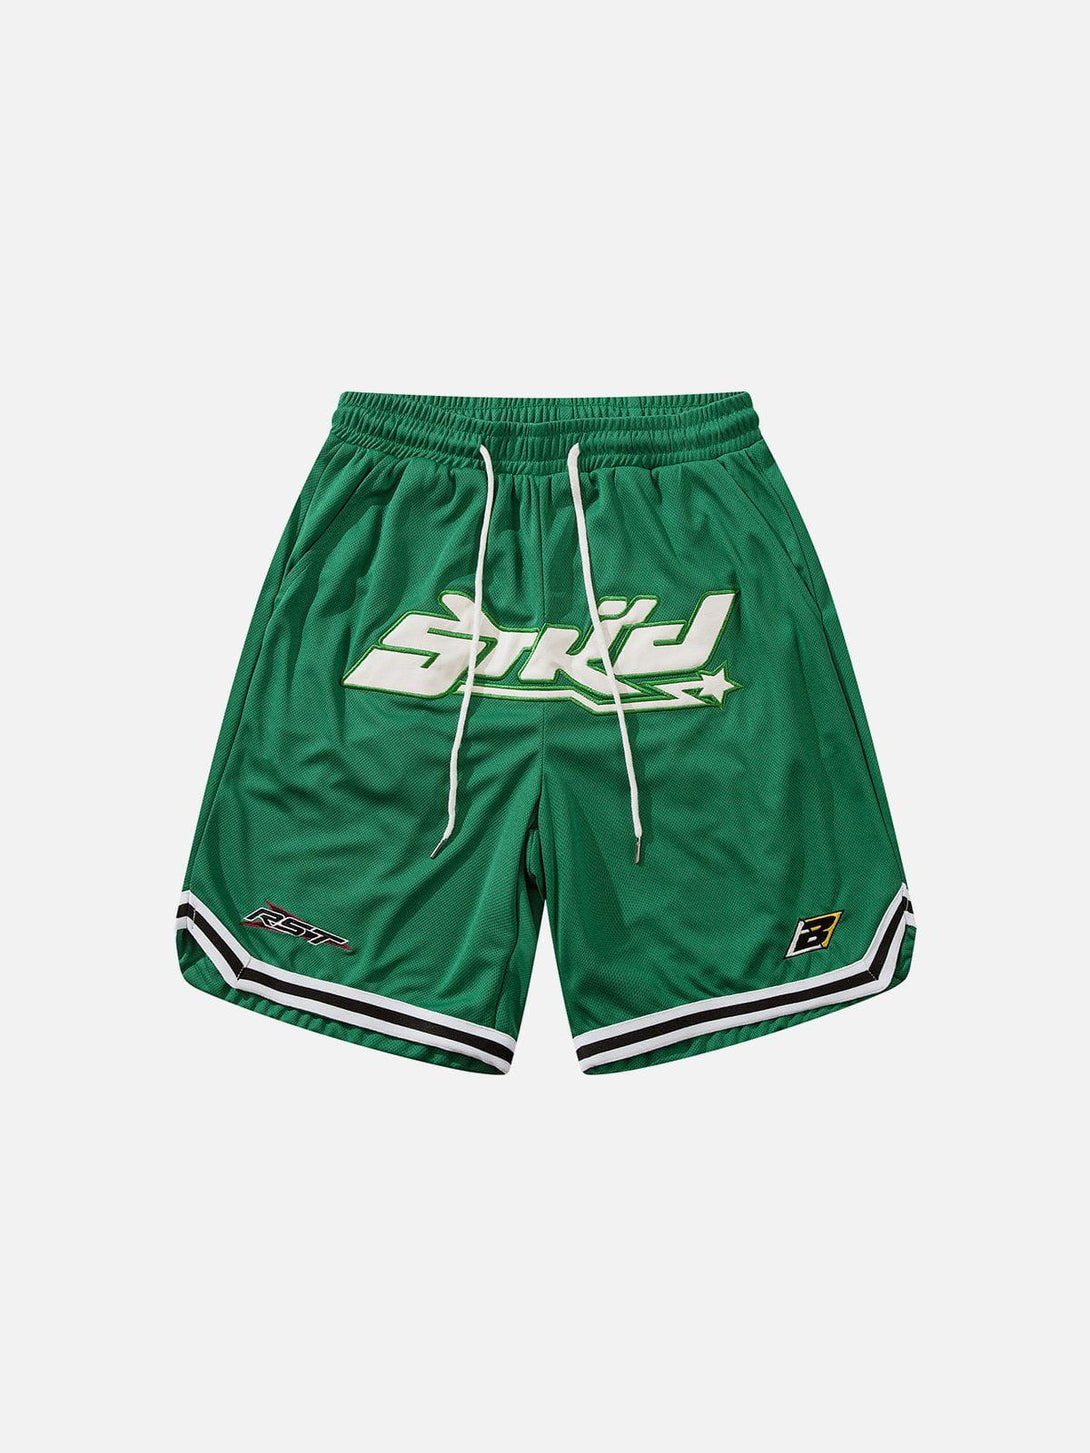 Levefly - Letter Embroidered Stripes Shorts - Streetwear Fashion - levefly.com